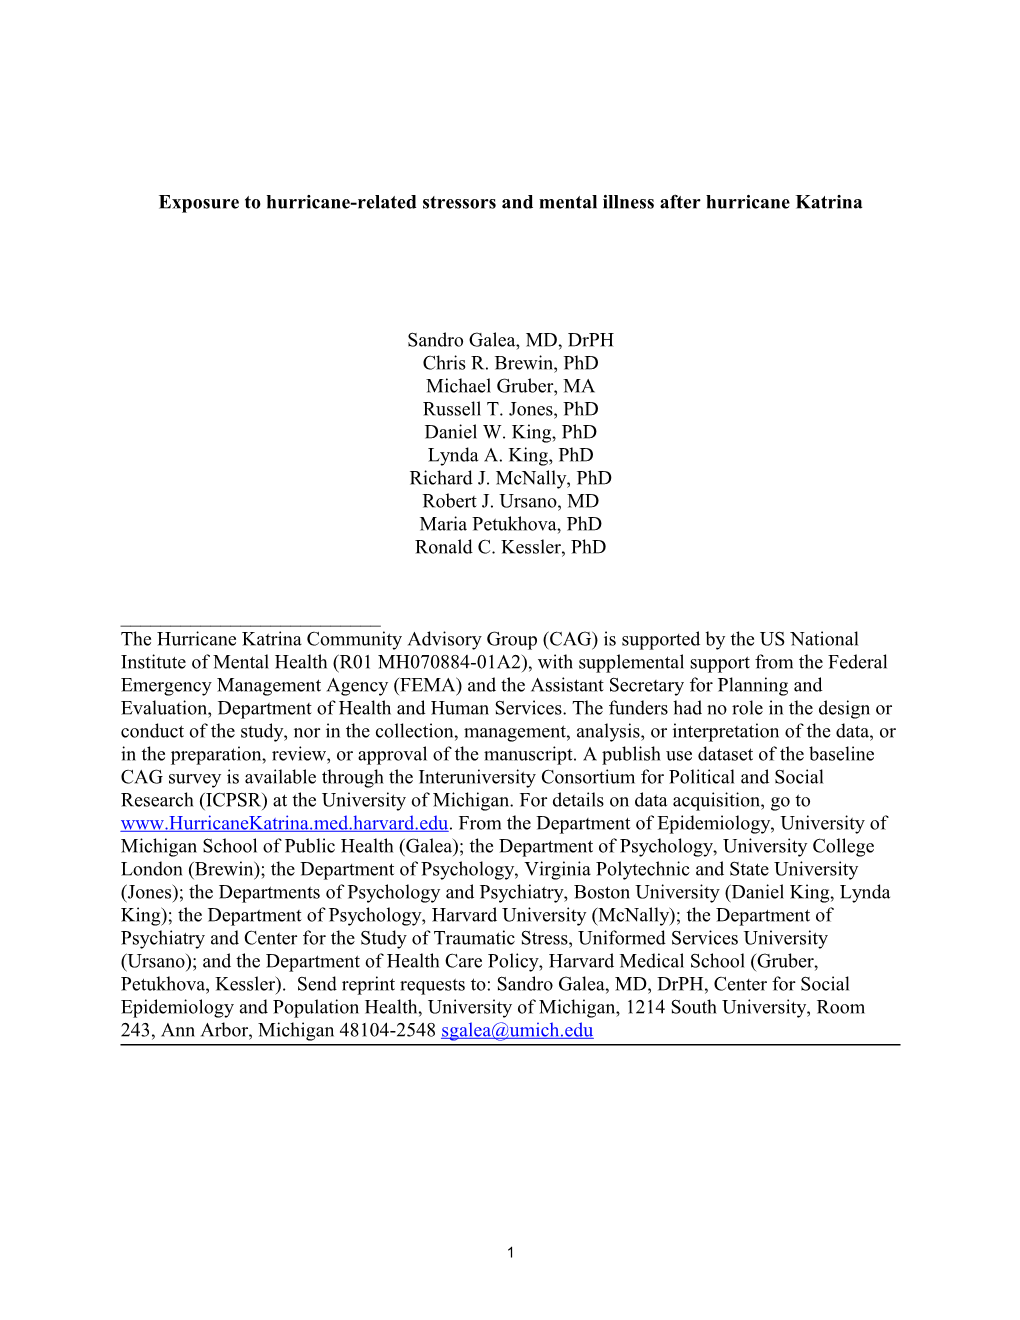 Exposure to Hurricane-Related Stressors and Mental Illness After Hurricane Katrina